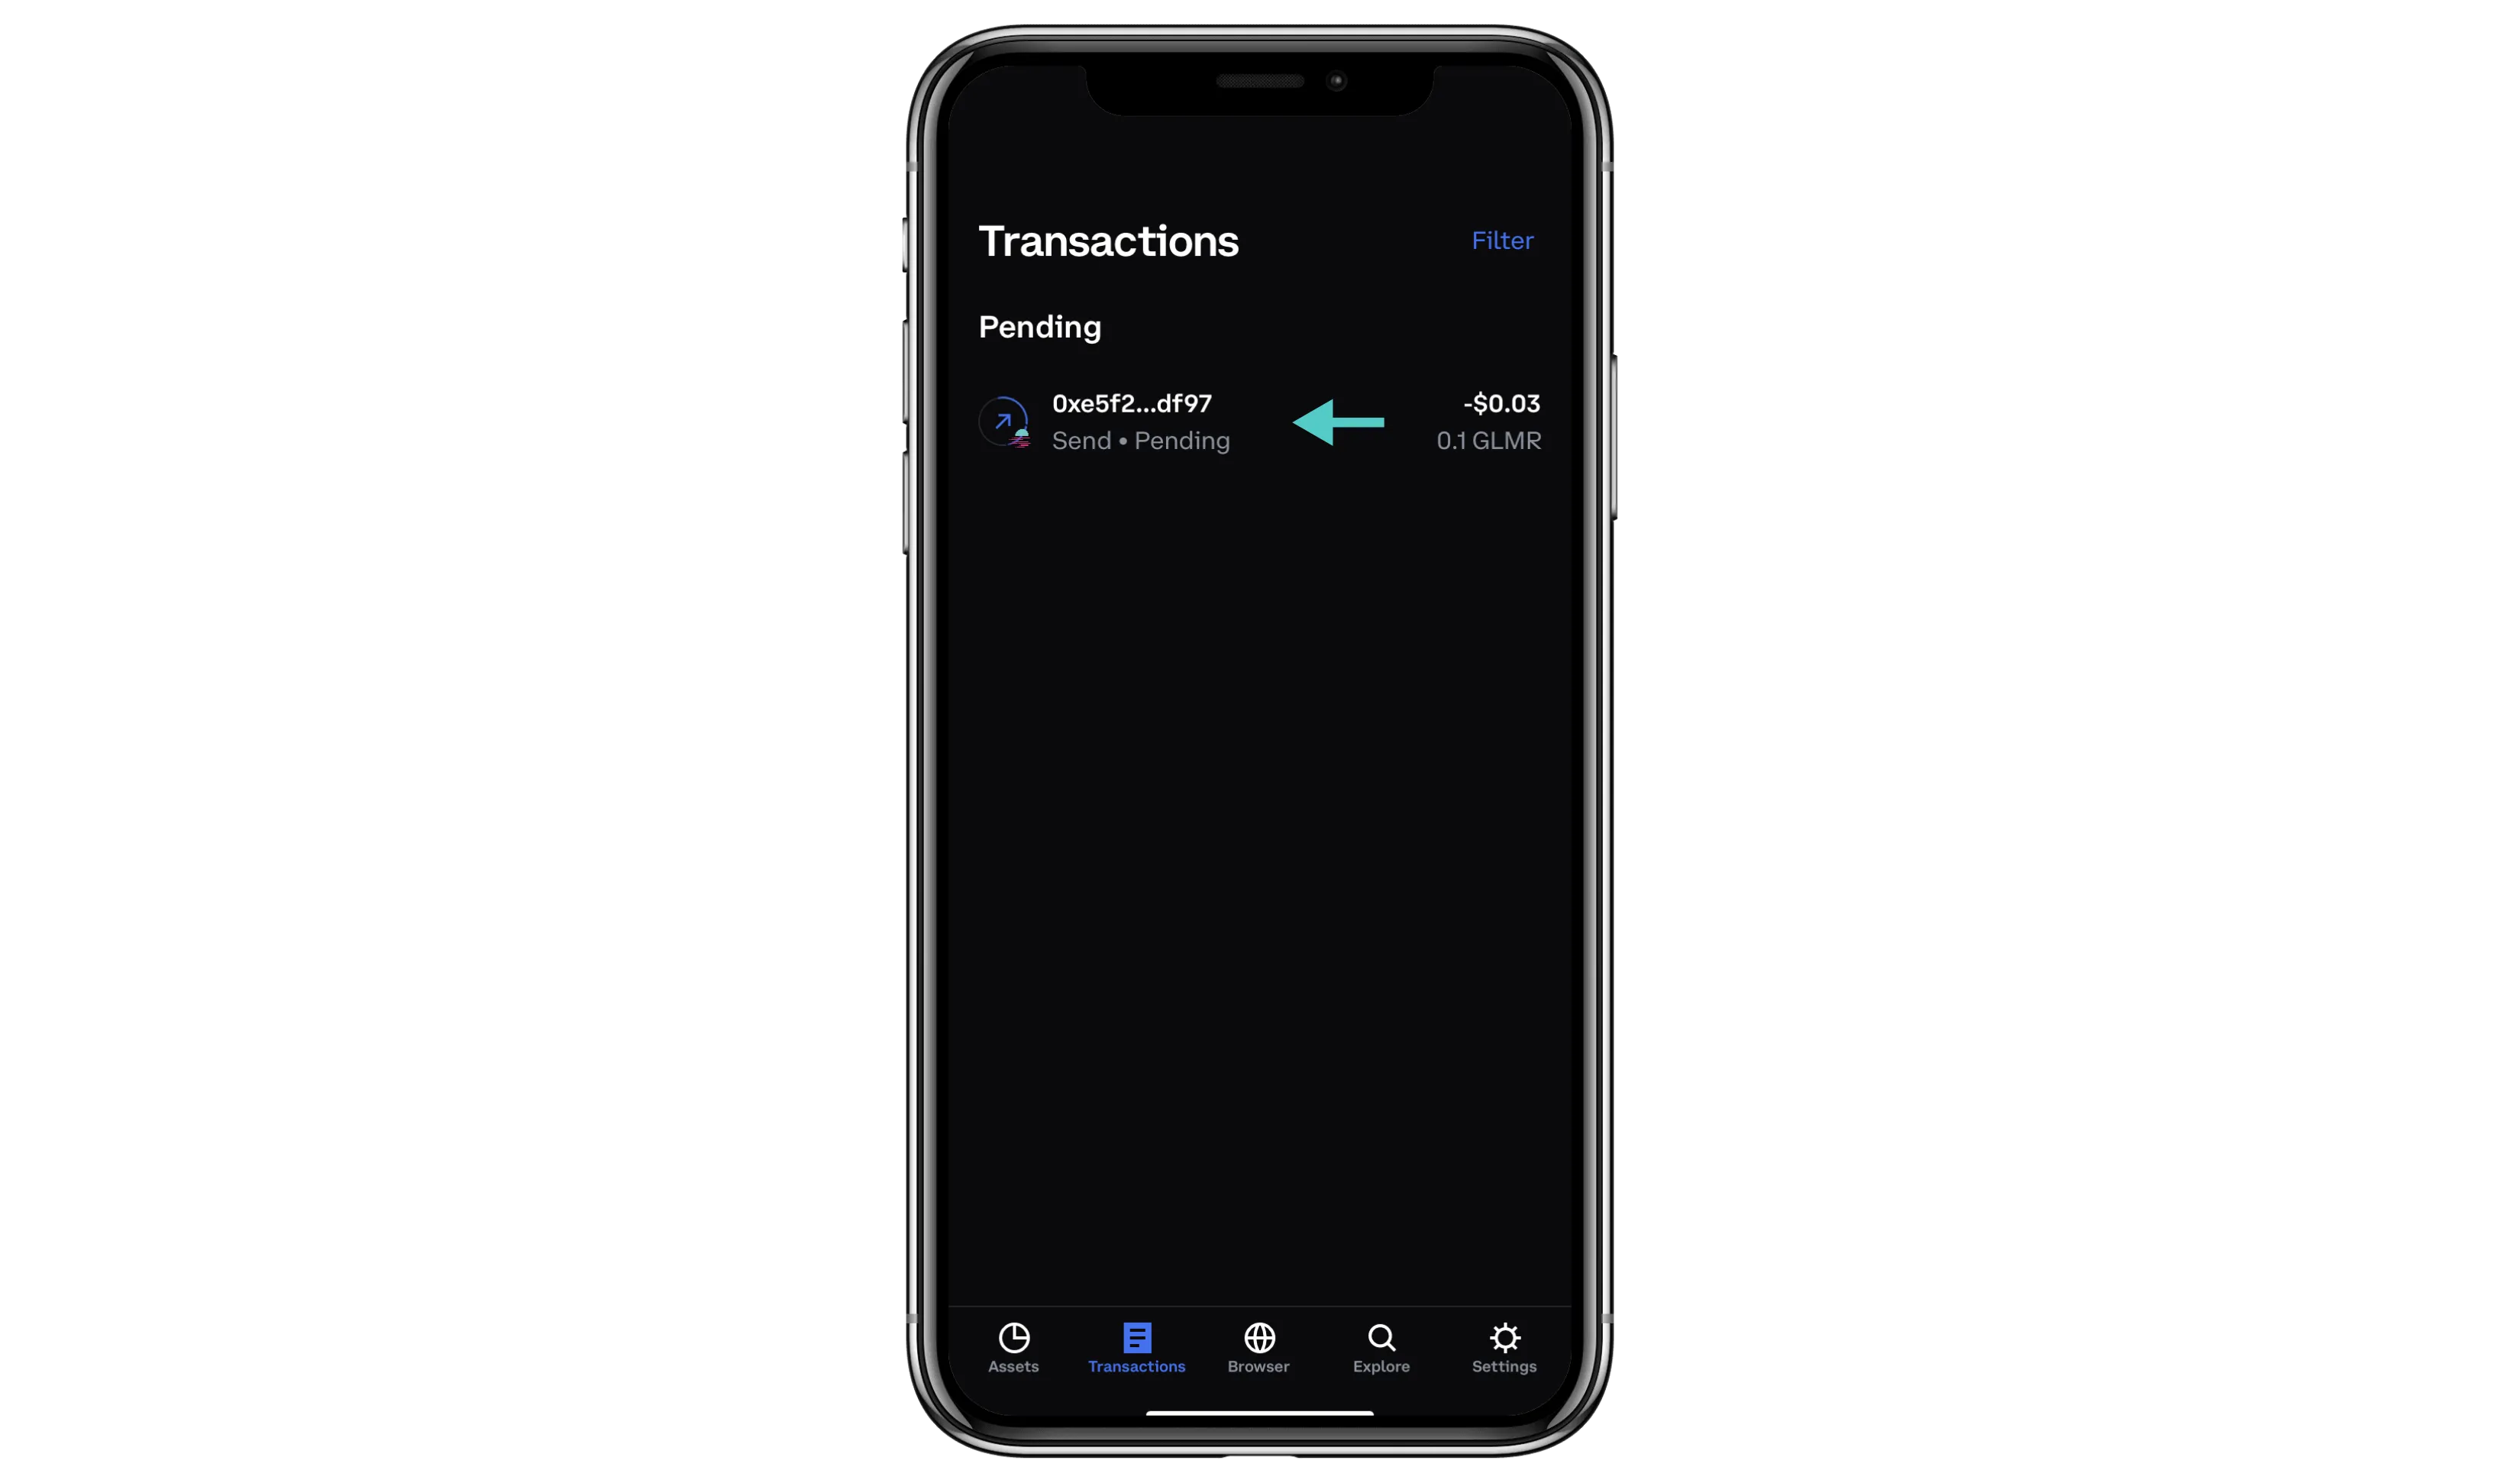 View your transaction history from the transactions screen.